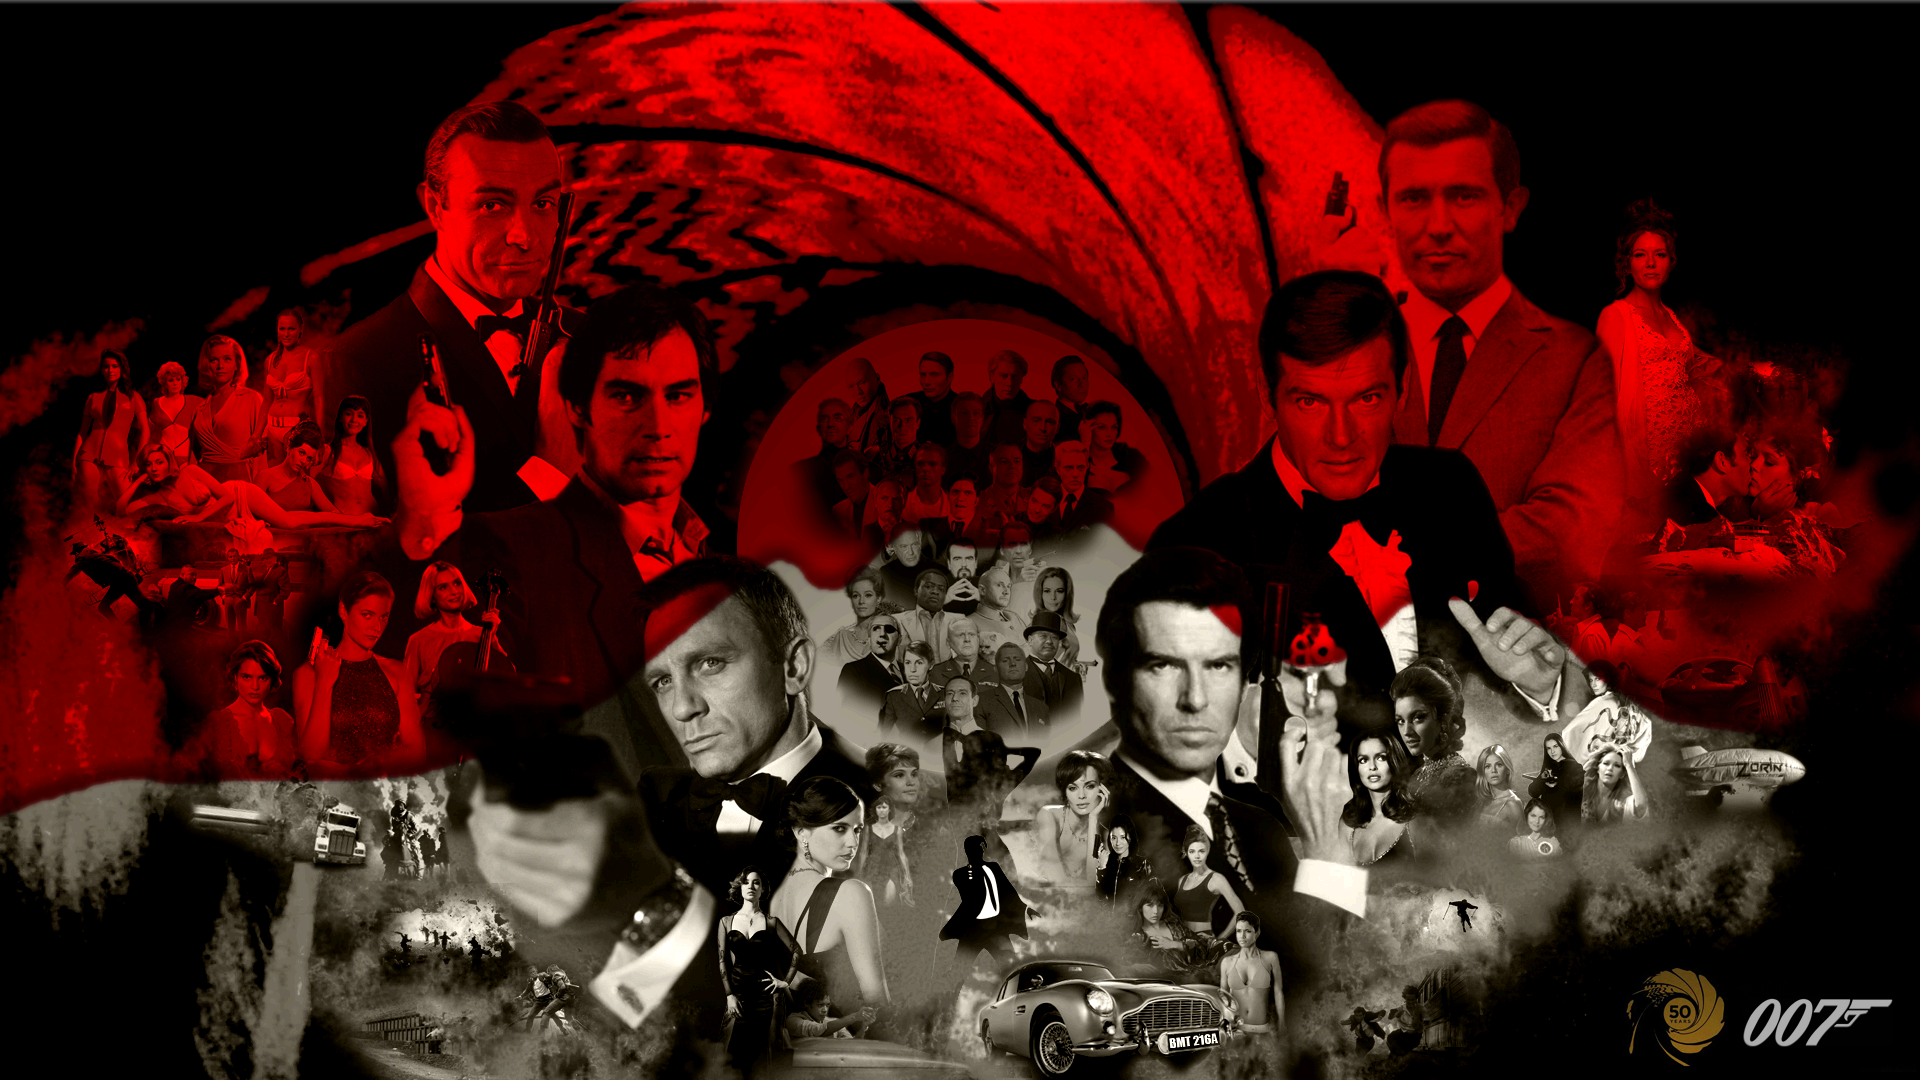 bond_50_anniversary_collage_by_the_hero_of_time28-d5kh5pa.png